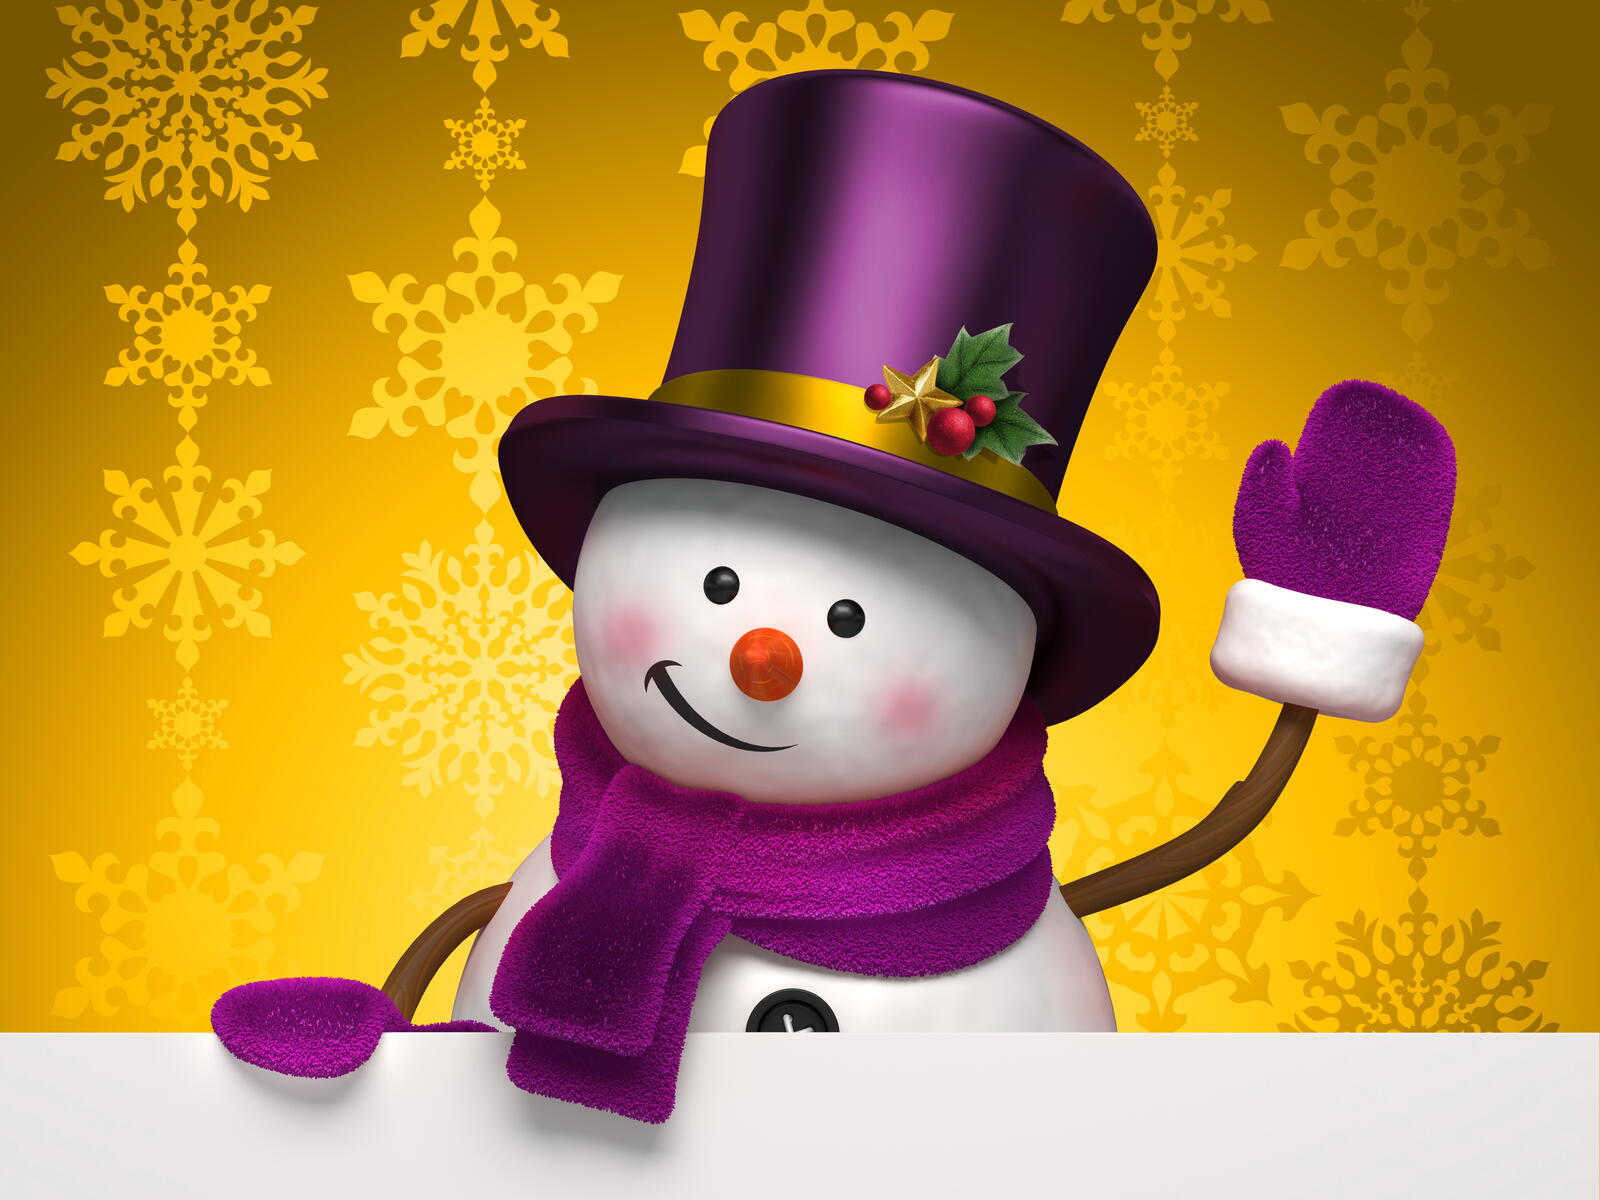 Wallpapers snowman christmas new year on the desktop